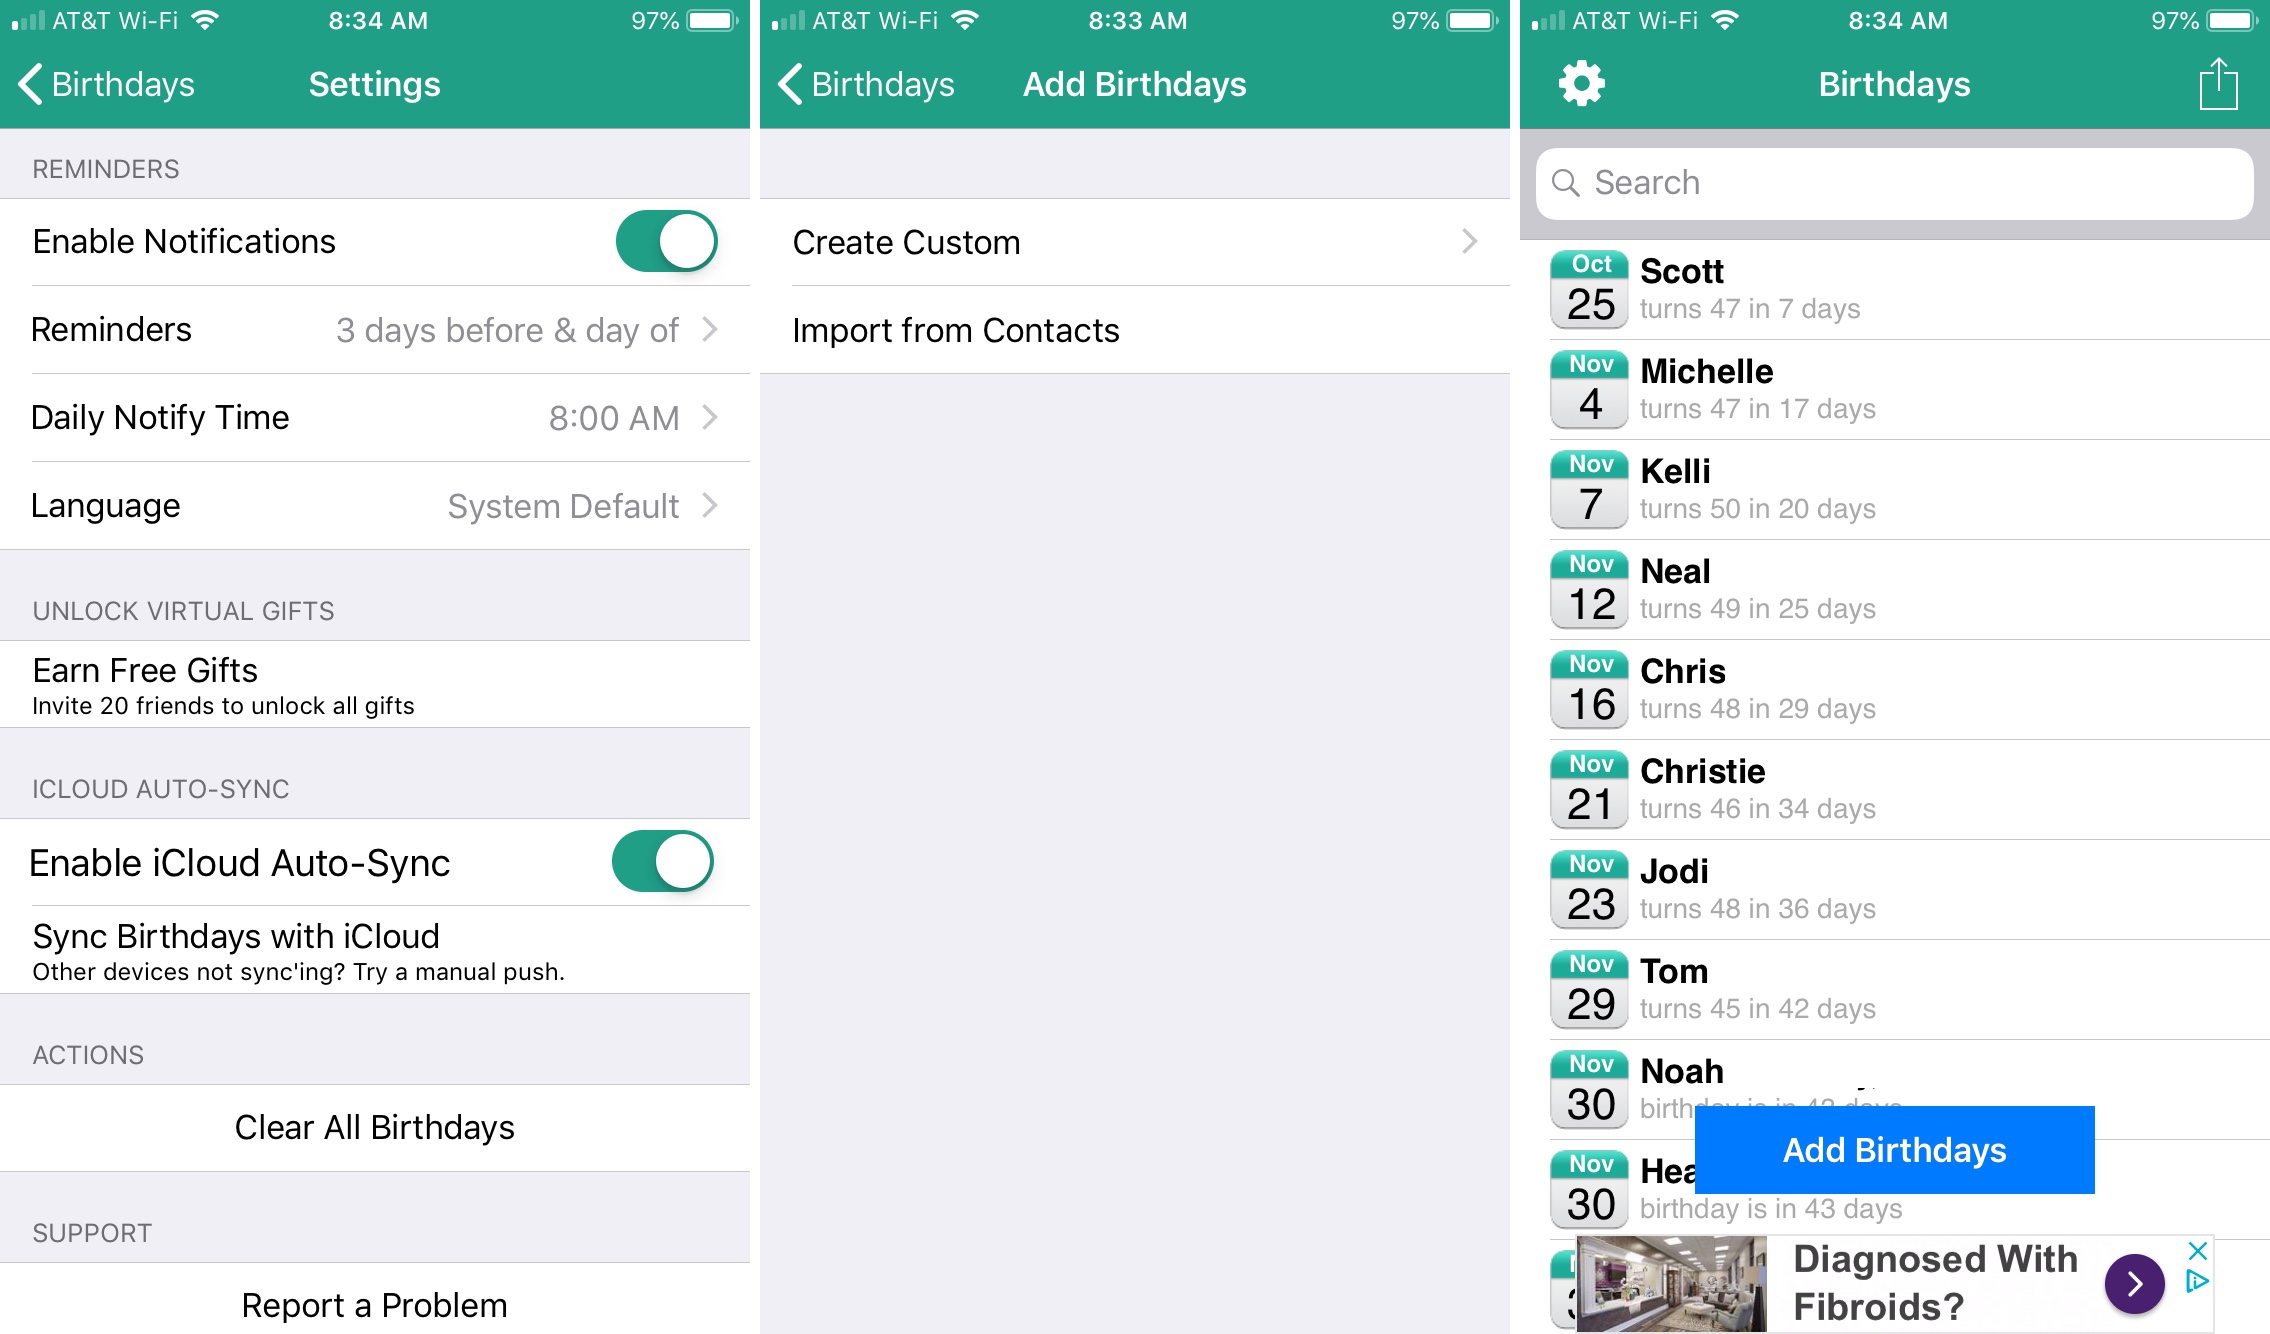 The best birthday reminder apps for iPhone